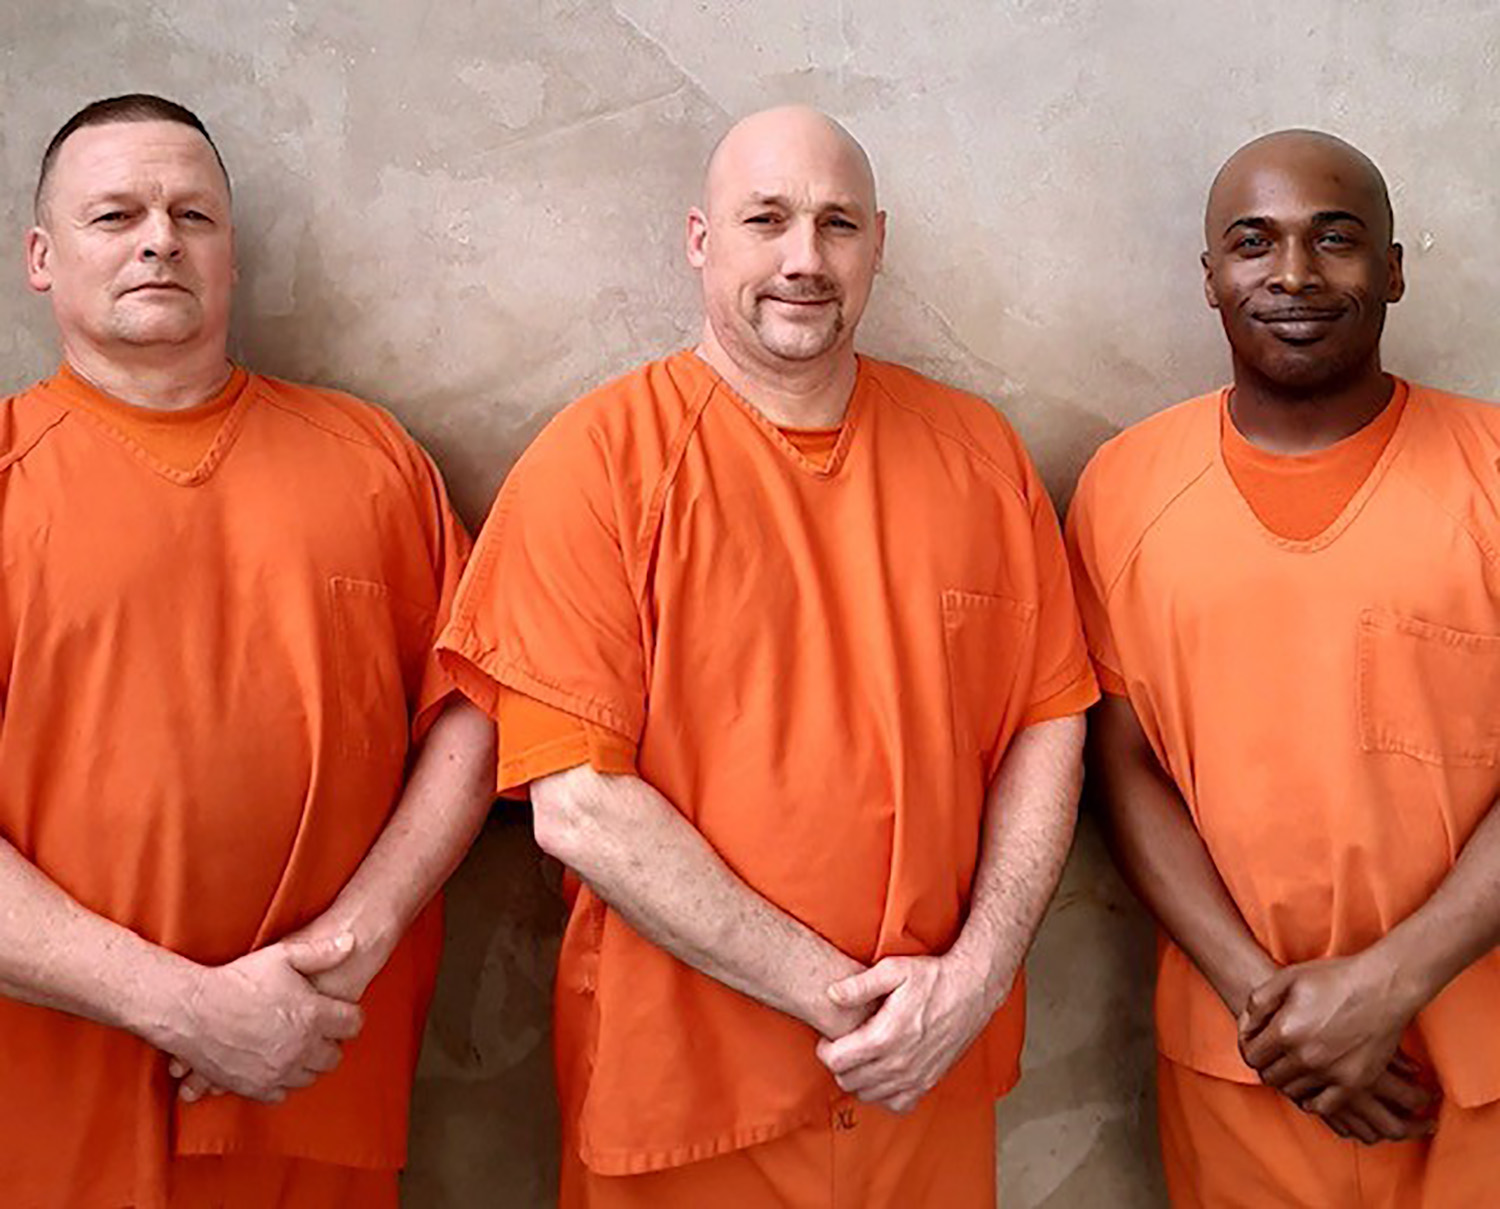 PHOTO: Gwinnett County Sheriff's Office posted a photo of inmates who came to the rescue of a deputy who collapsed and struck his head during a medical incident at the jail in July 2020.